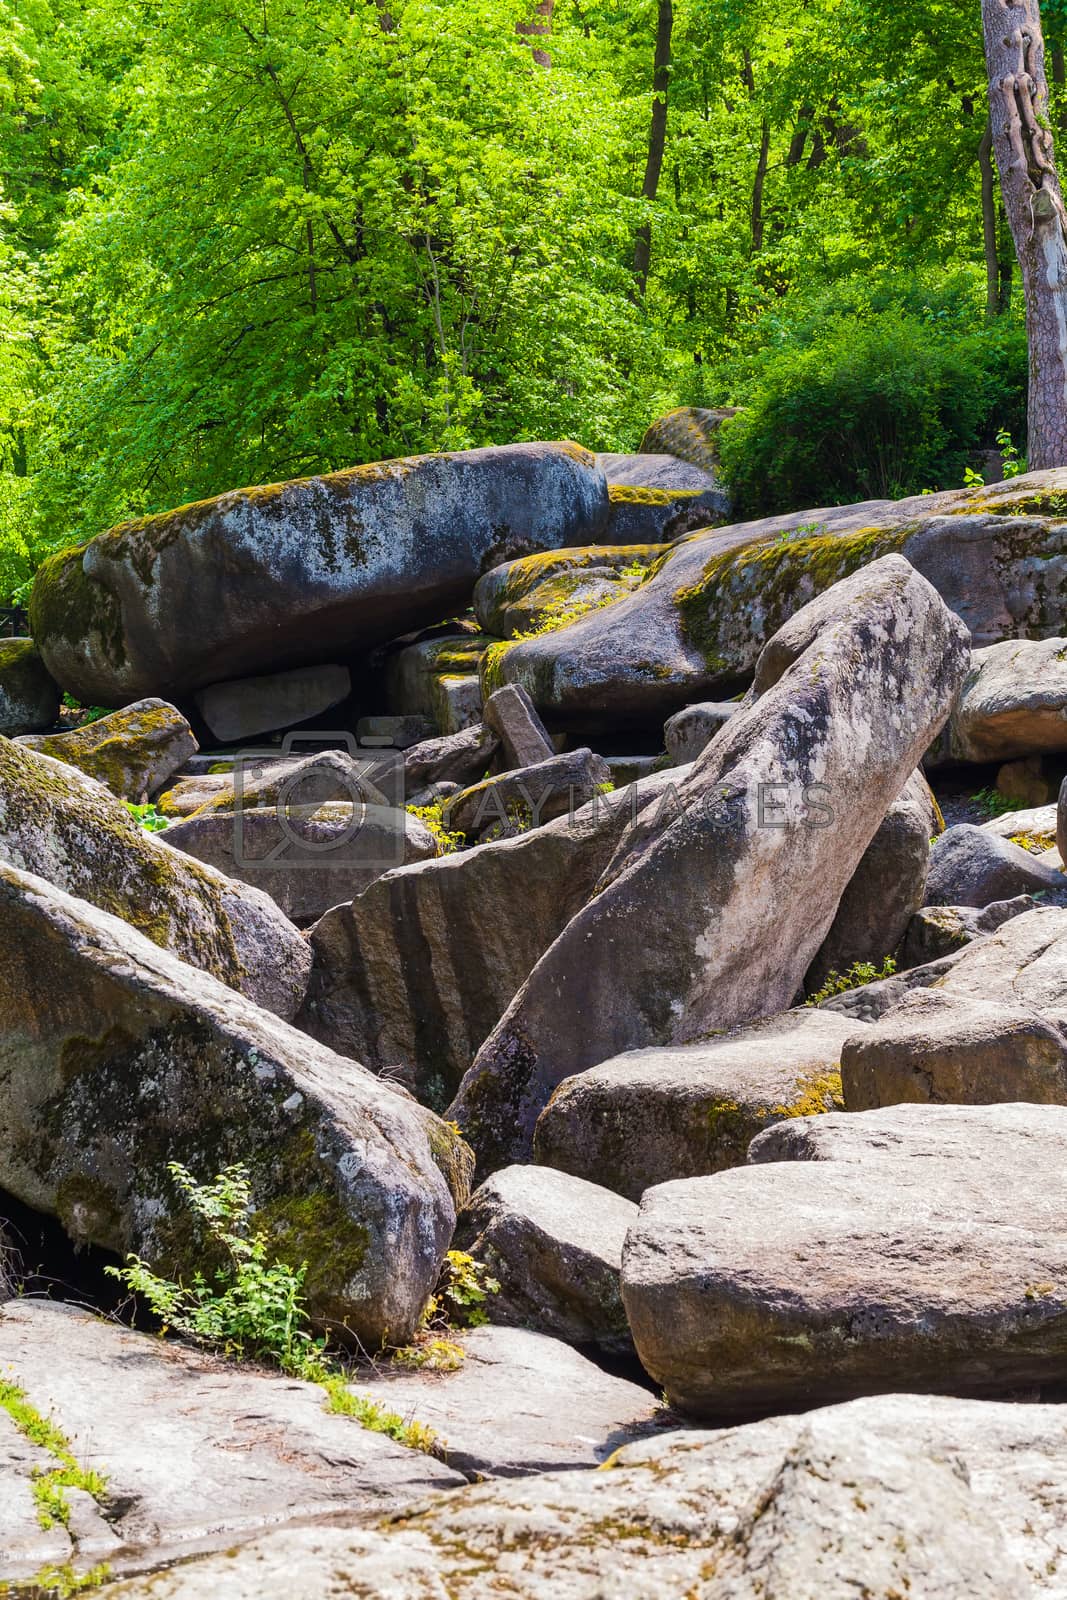 Royalty free image of rocky boulders by MegaArt